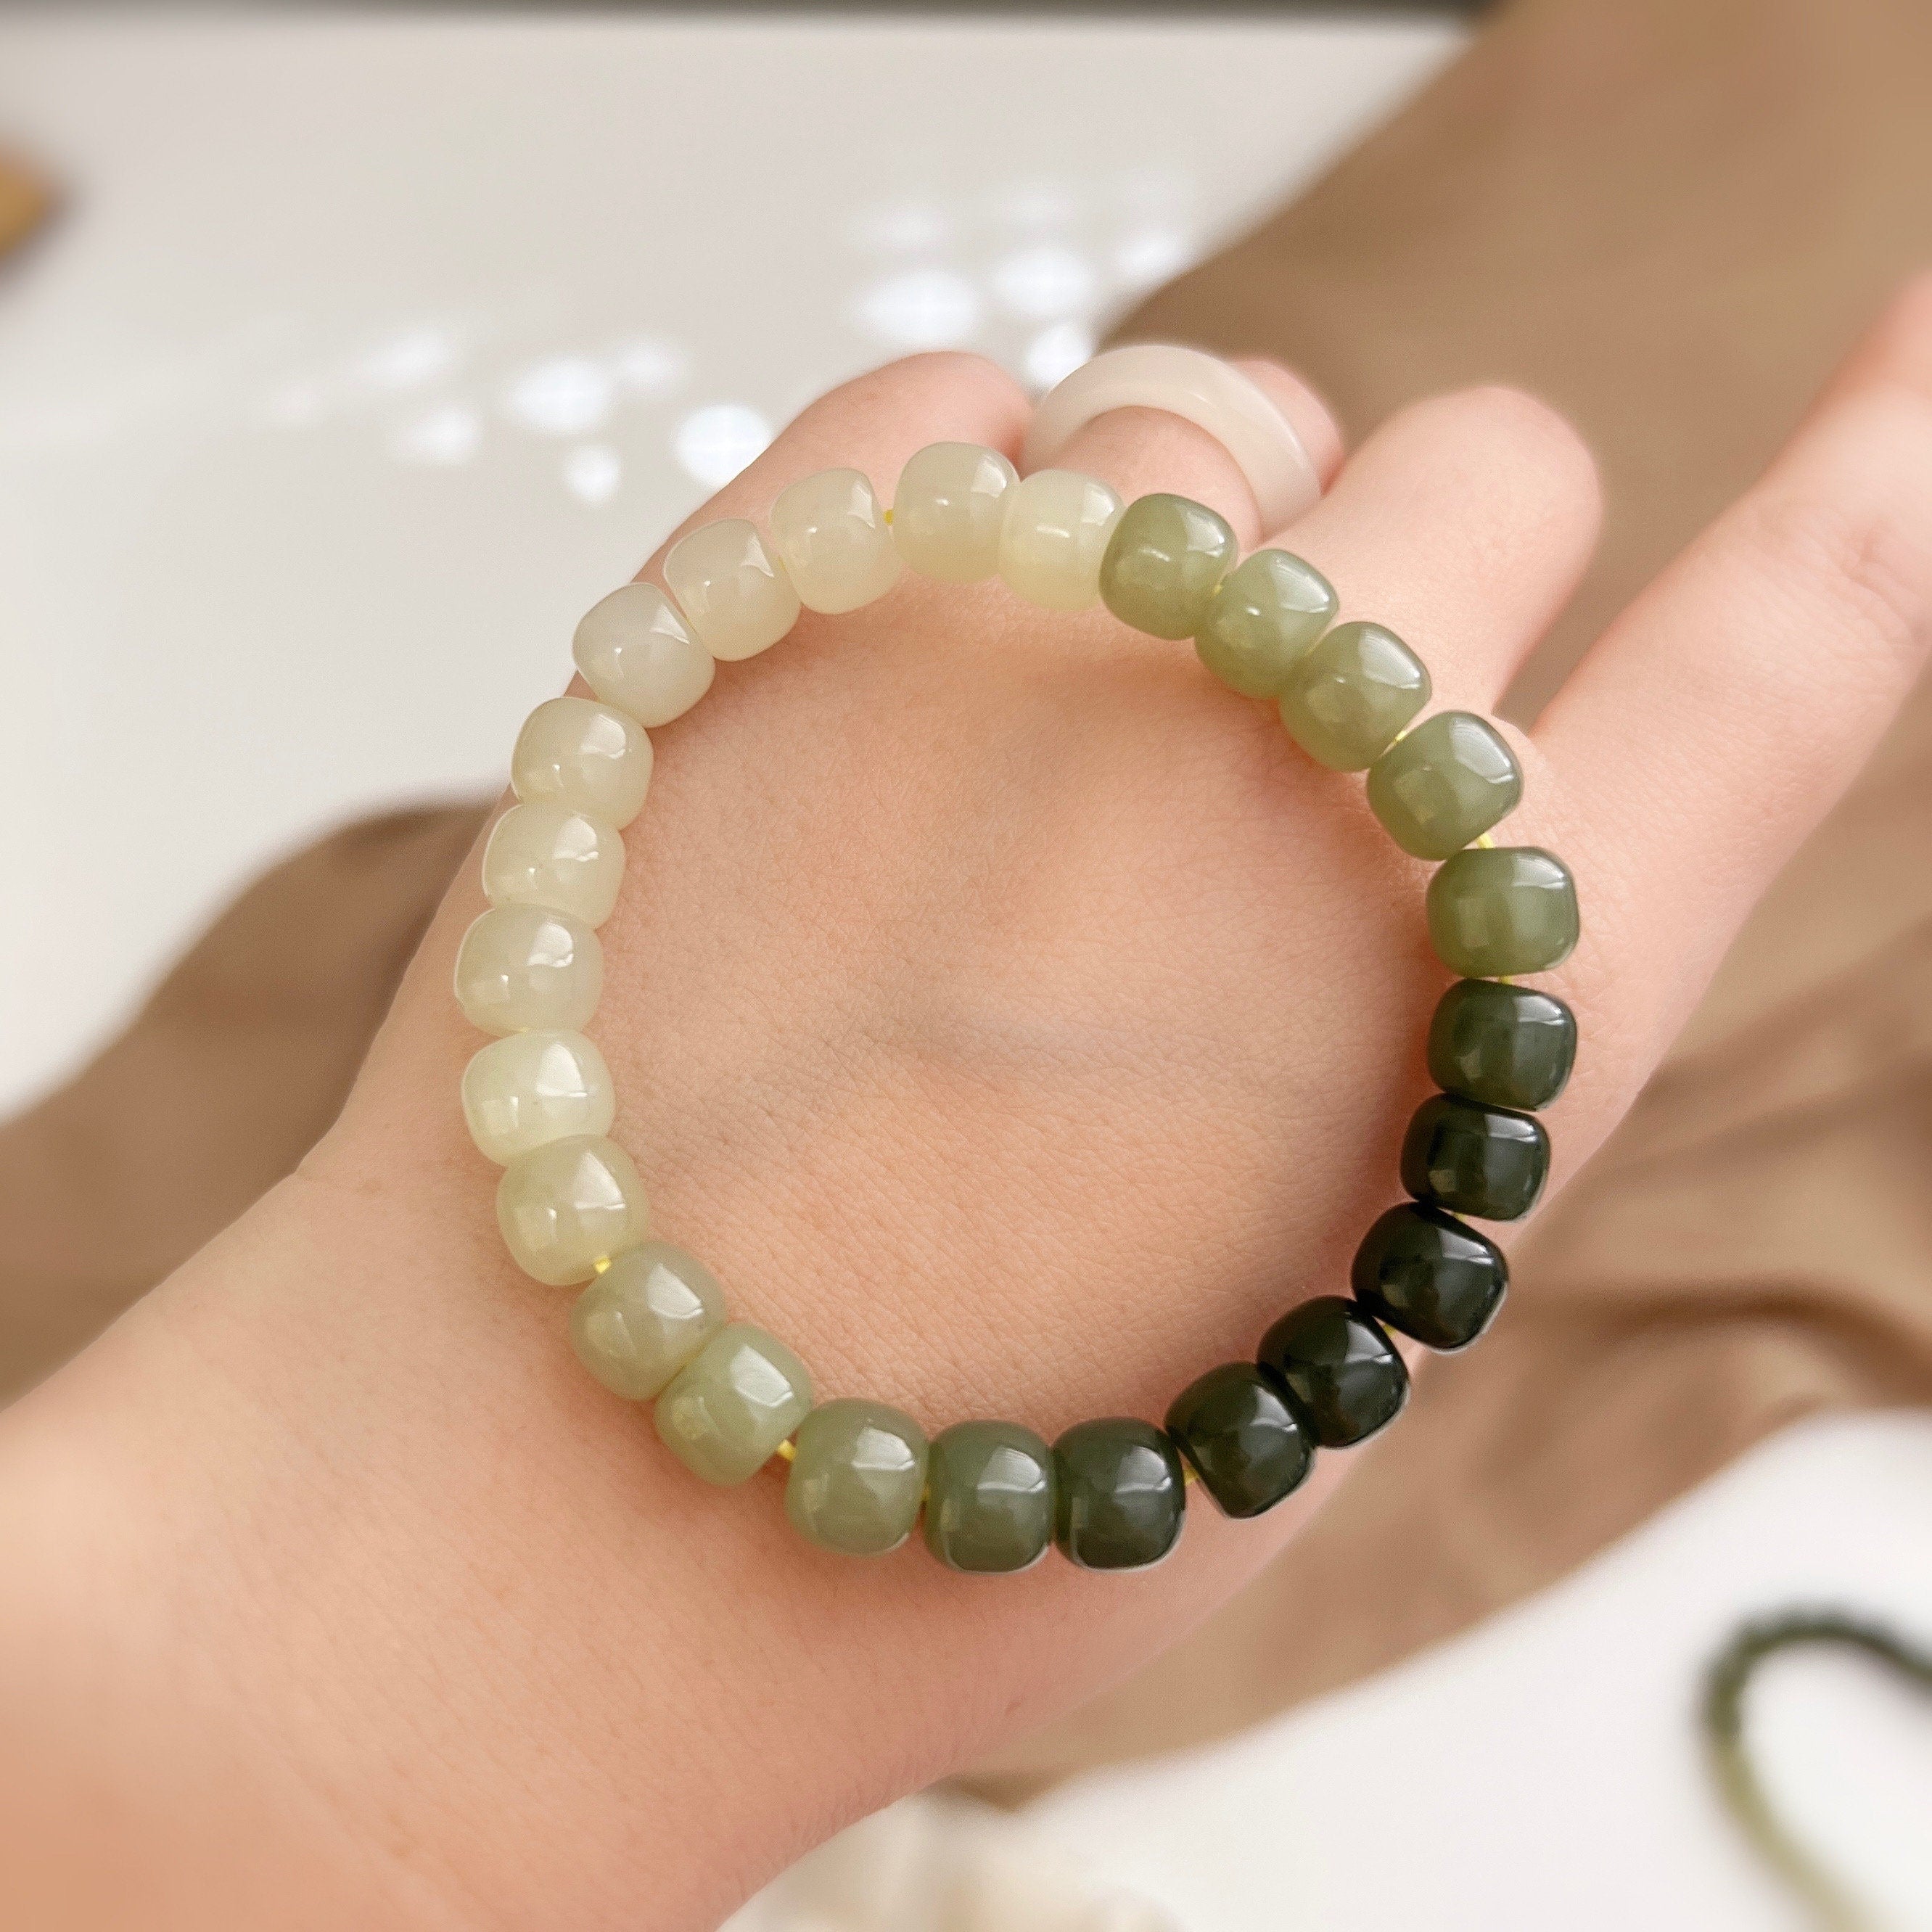 Amazon.com: jade bracelet for women ，beaded bracelets ，6 * 9mm natural jade  beads,brass plated 18k gold spacer beads,DIY Stretch Bracelet with 6.5-8  inch hand circumference,gifts for girlfriend. (Emerald green) : Handmade  Products